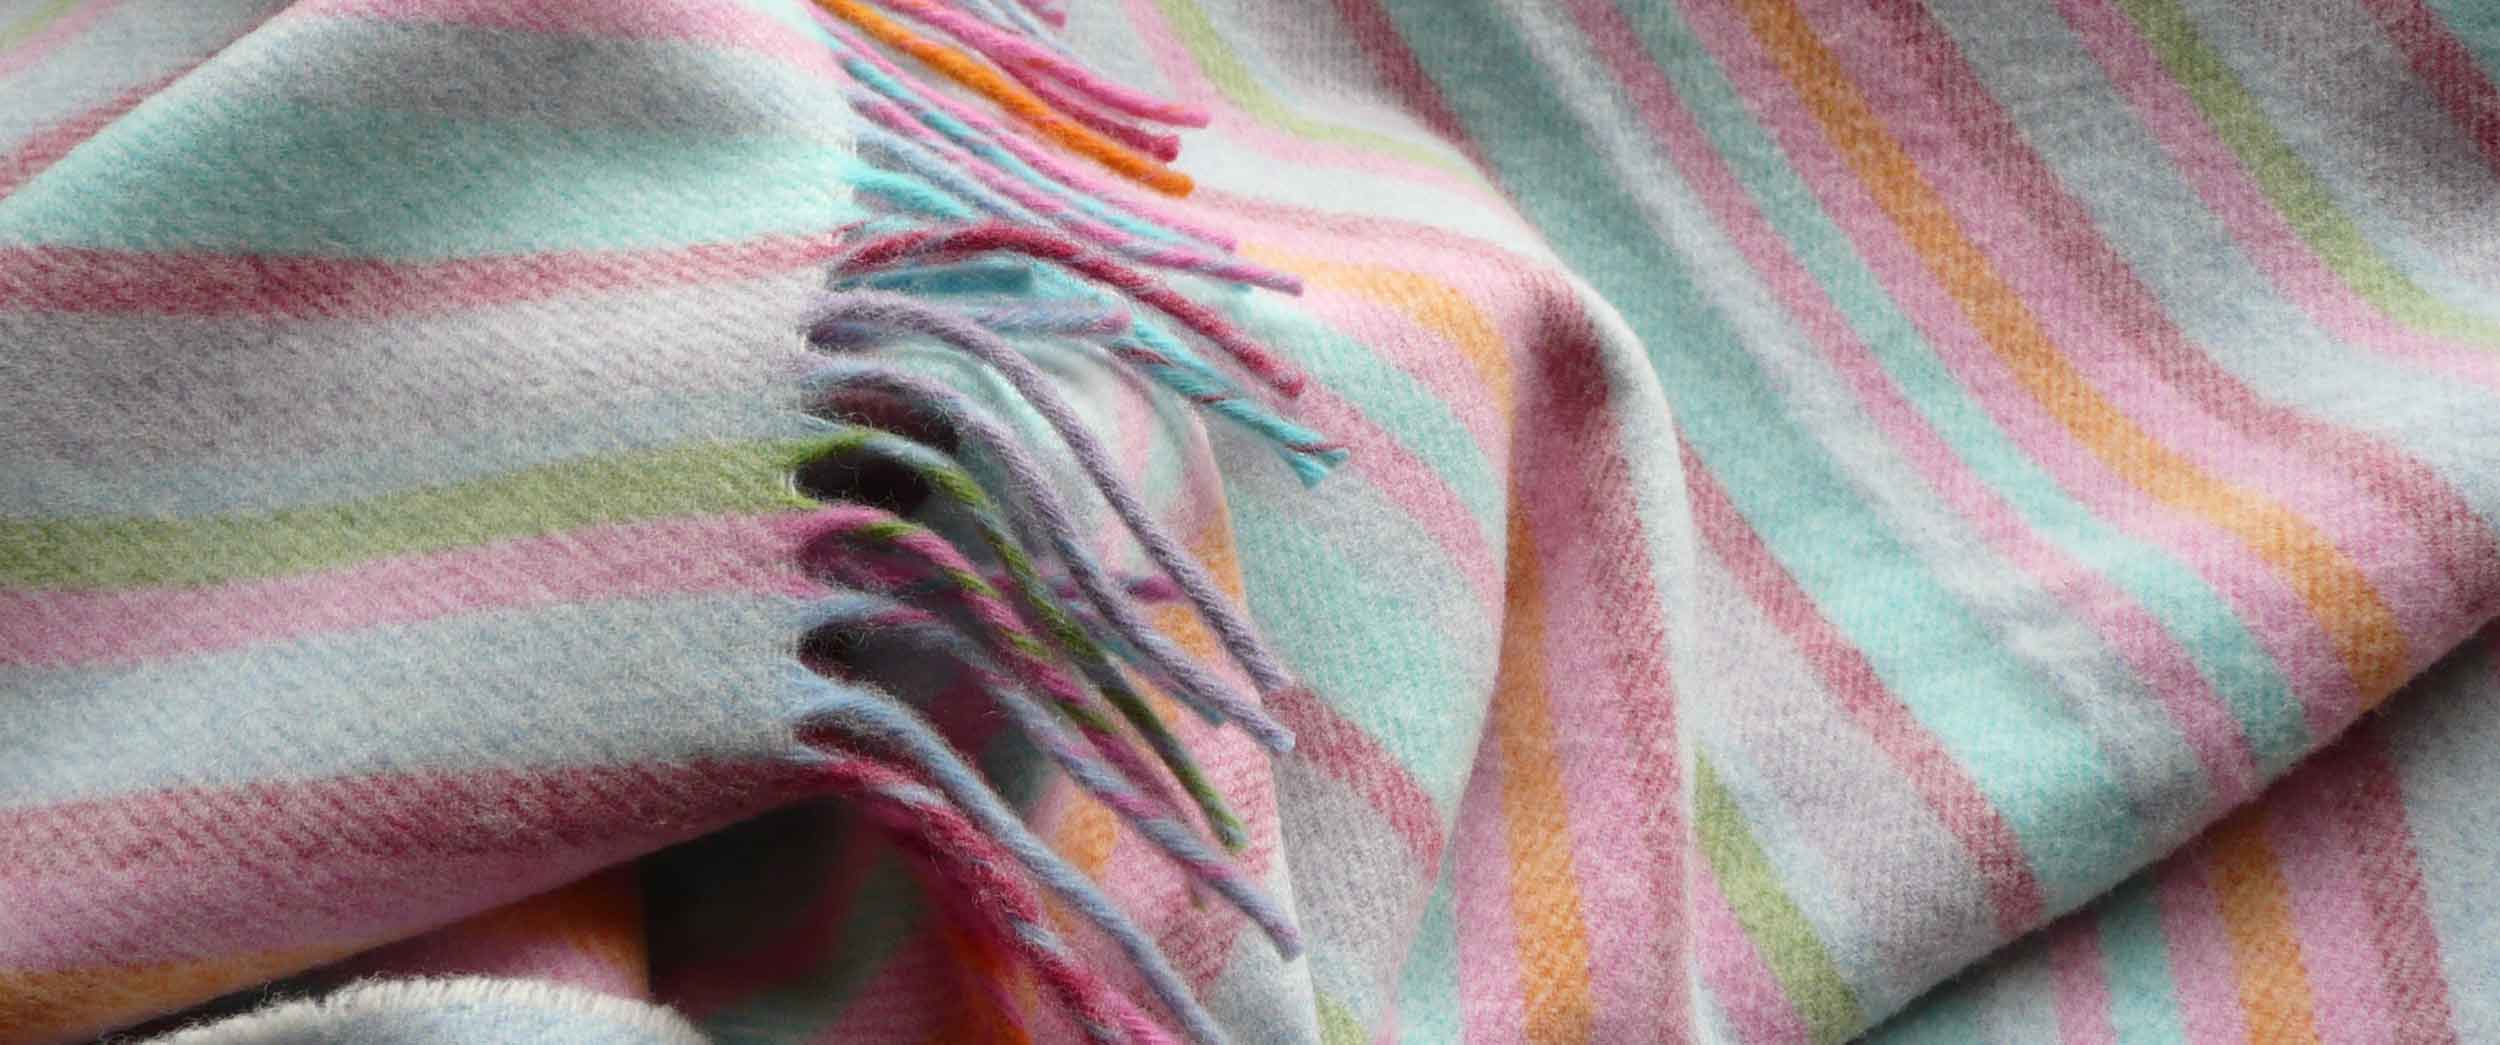 Striped Lambswool Throws 